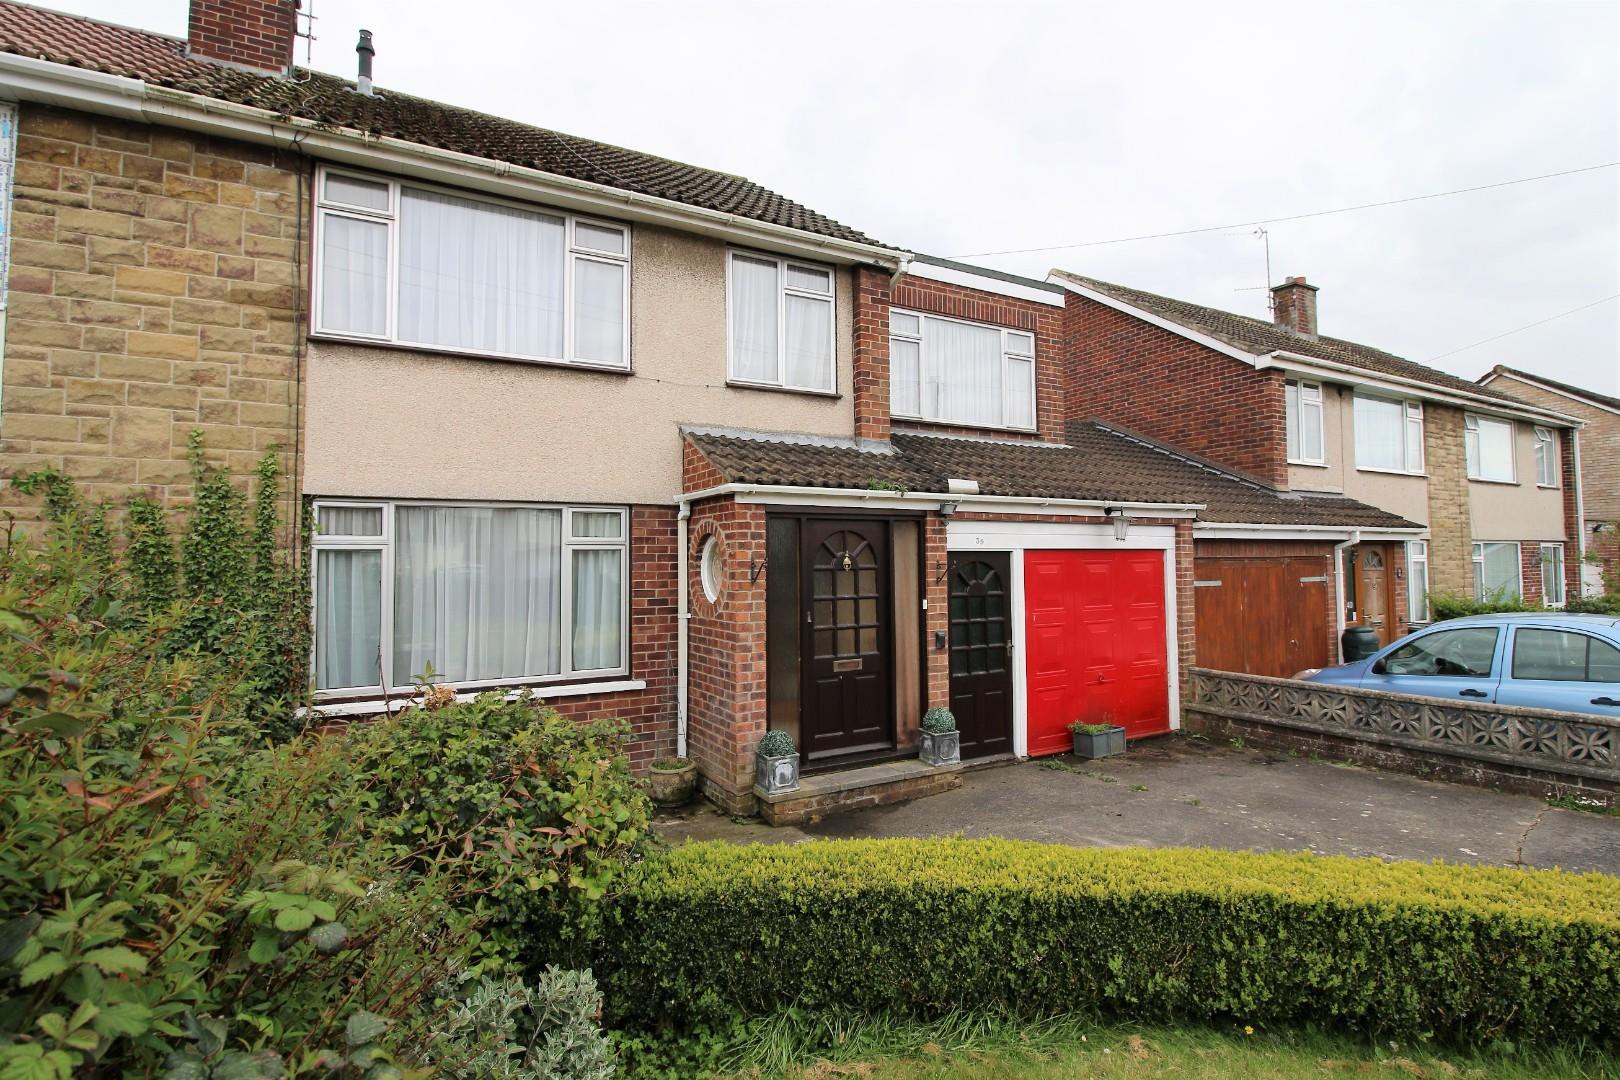 Extended family home in the heart of Yatton village